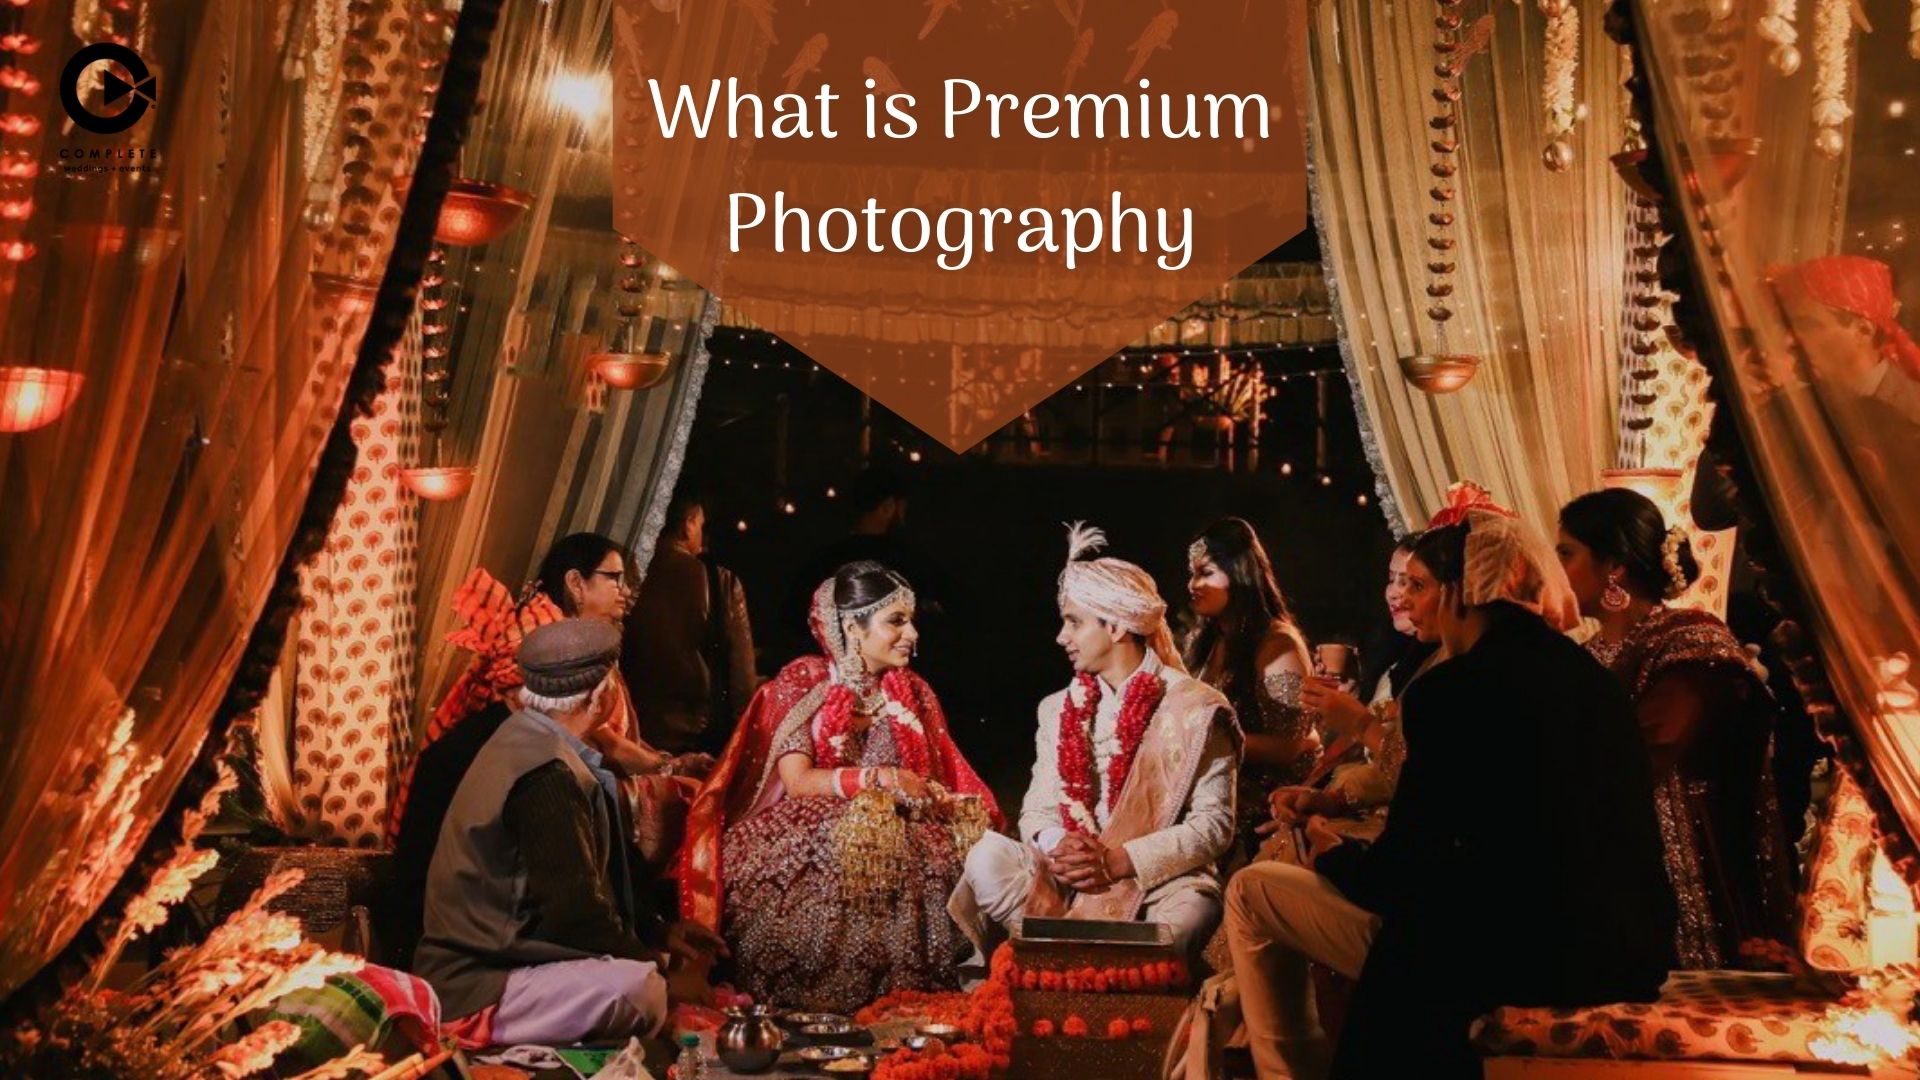 What is Premium Photography?